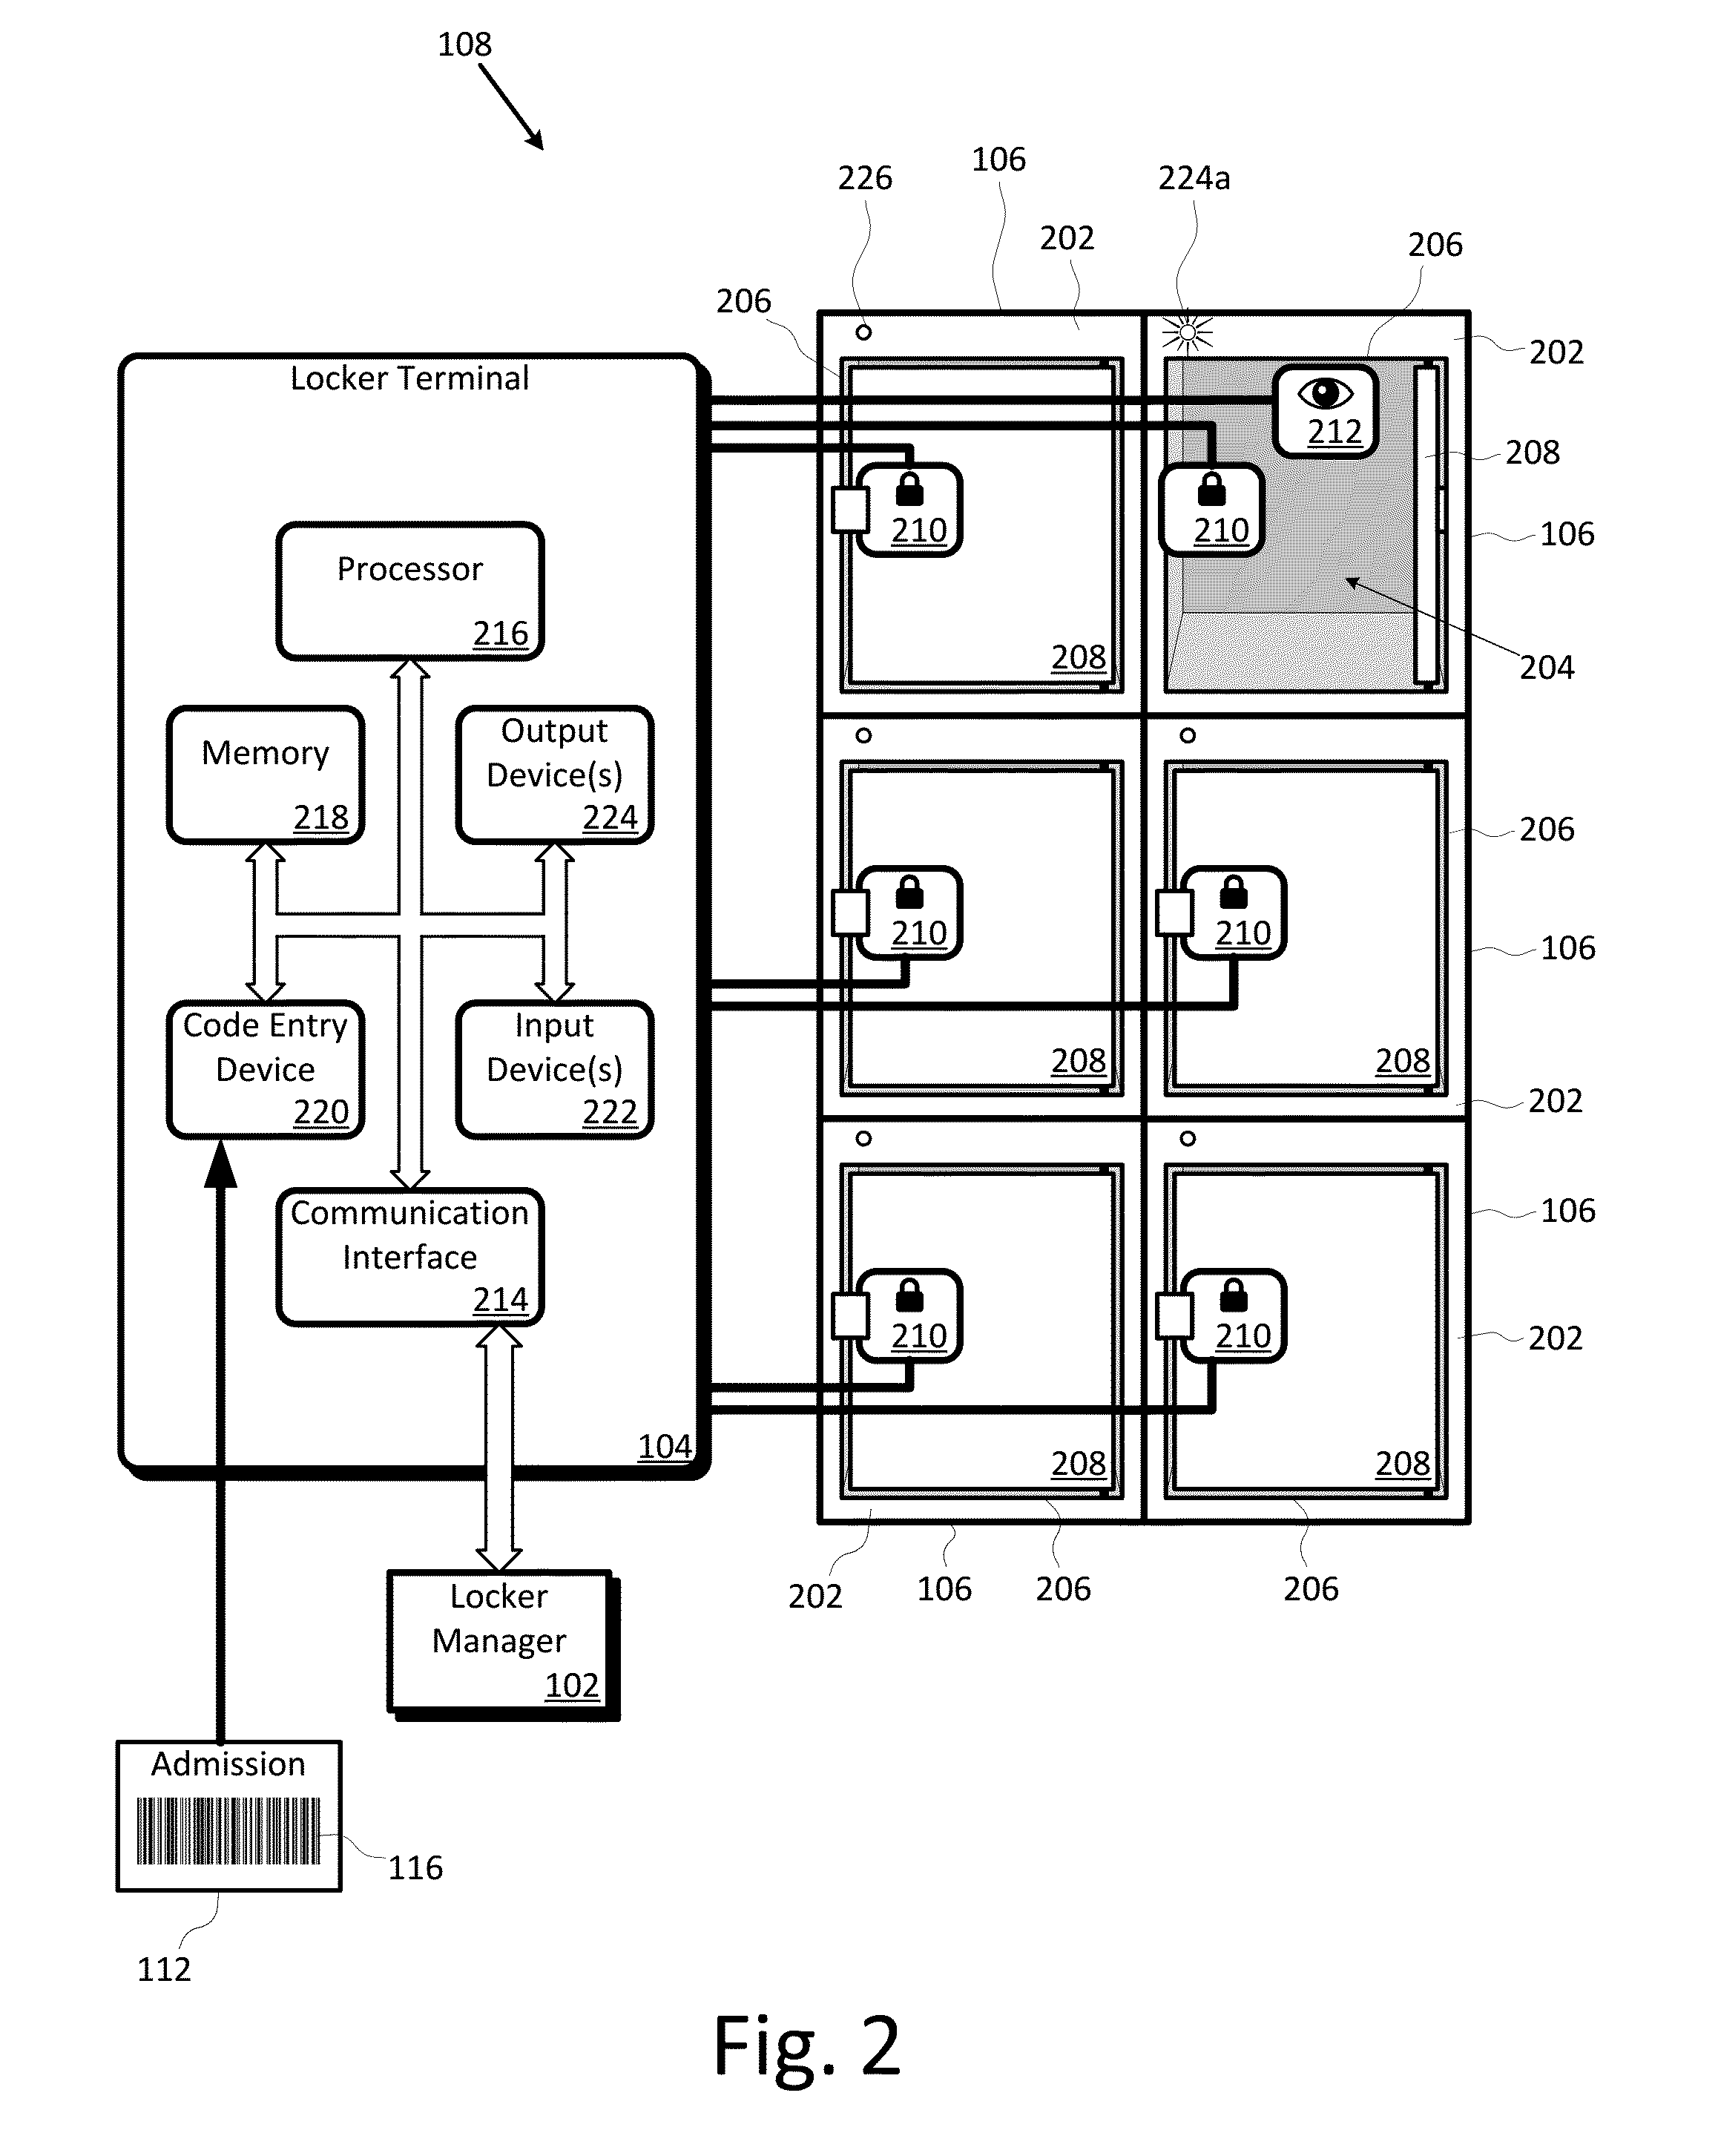 Electronic locker right acquisition via an external system